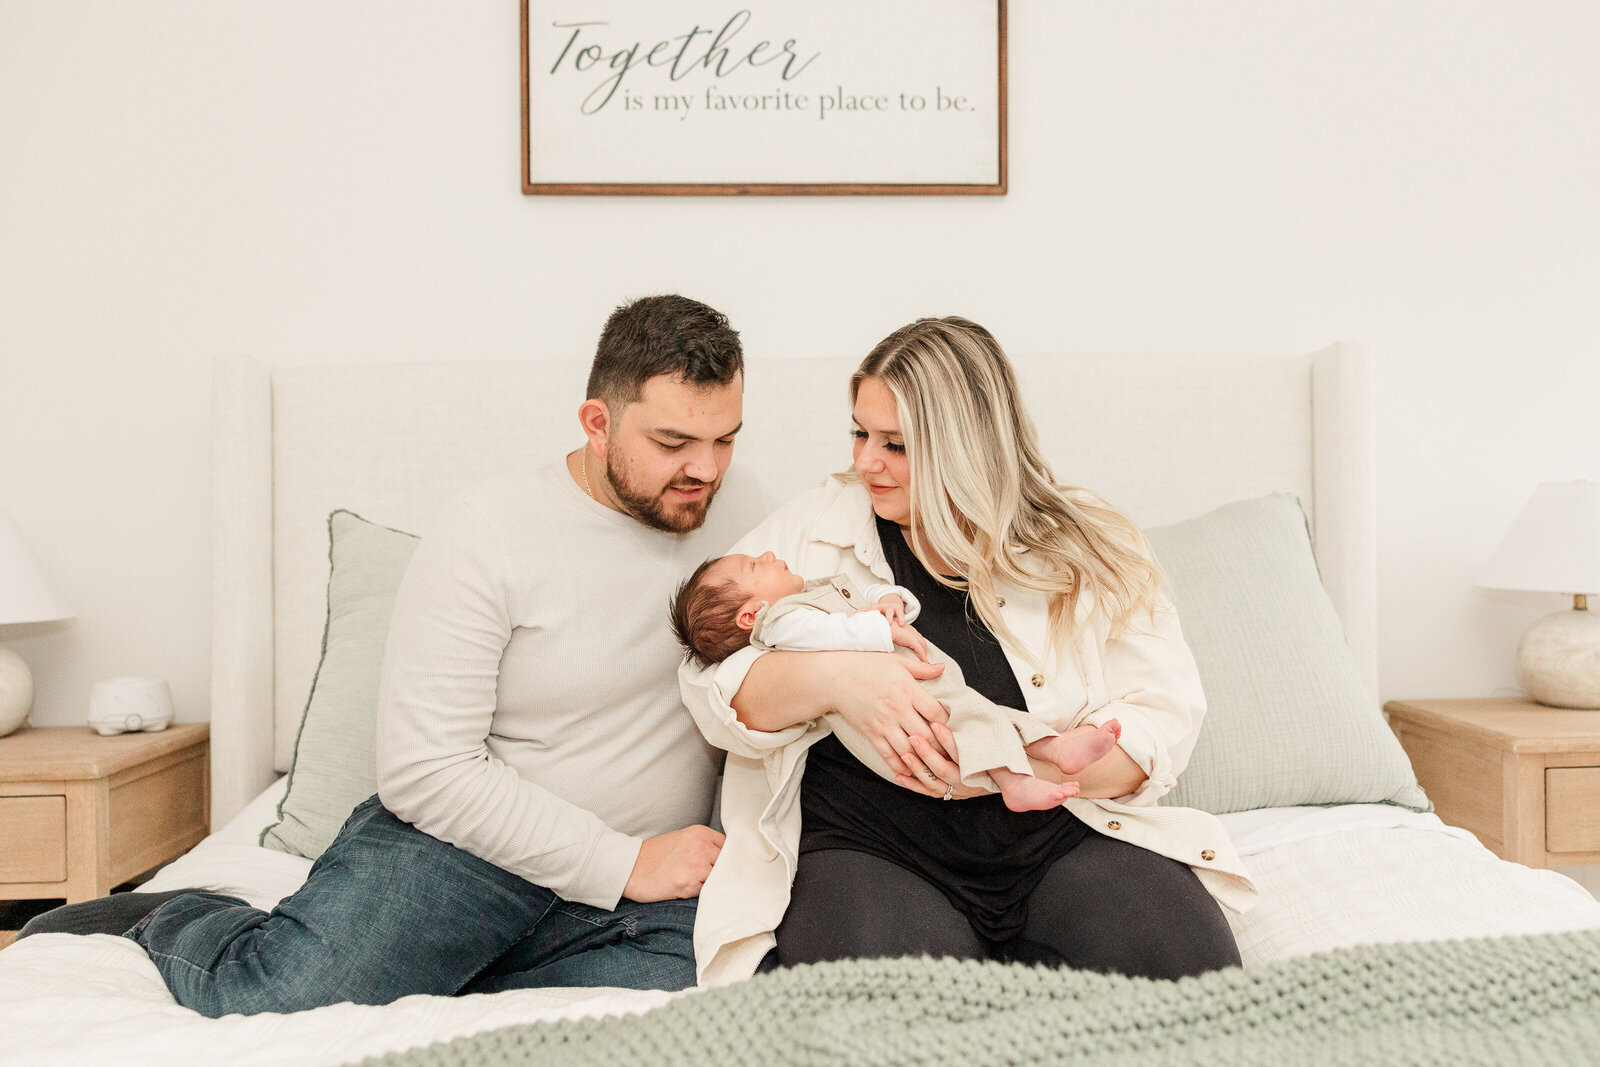 Akron Newborn Photographer Lifestyle session together is my favorite place to be